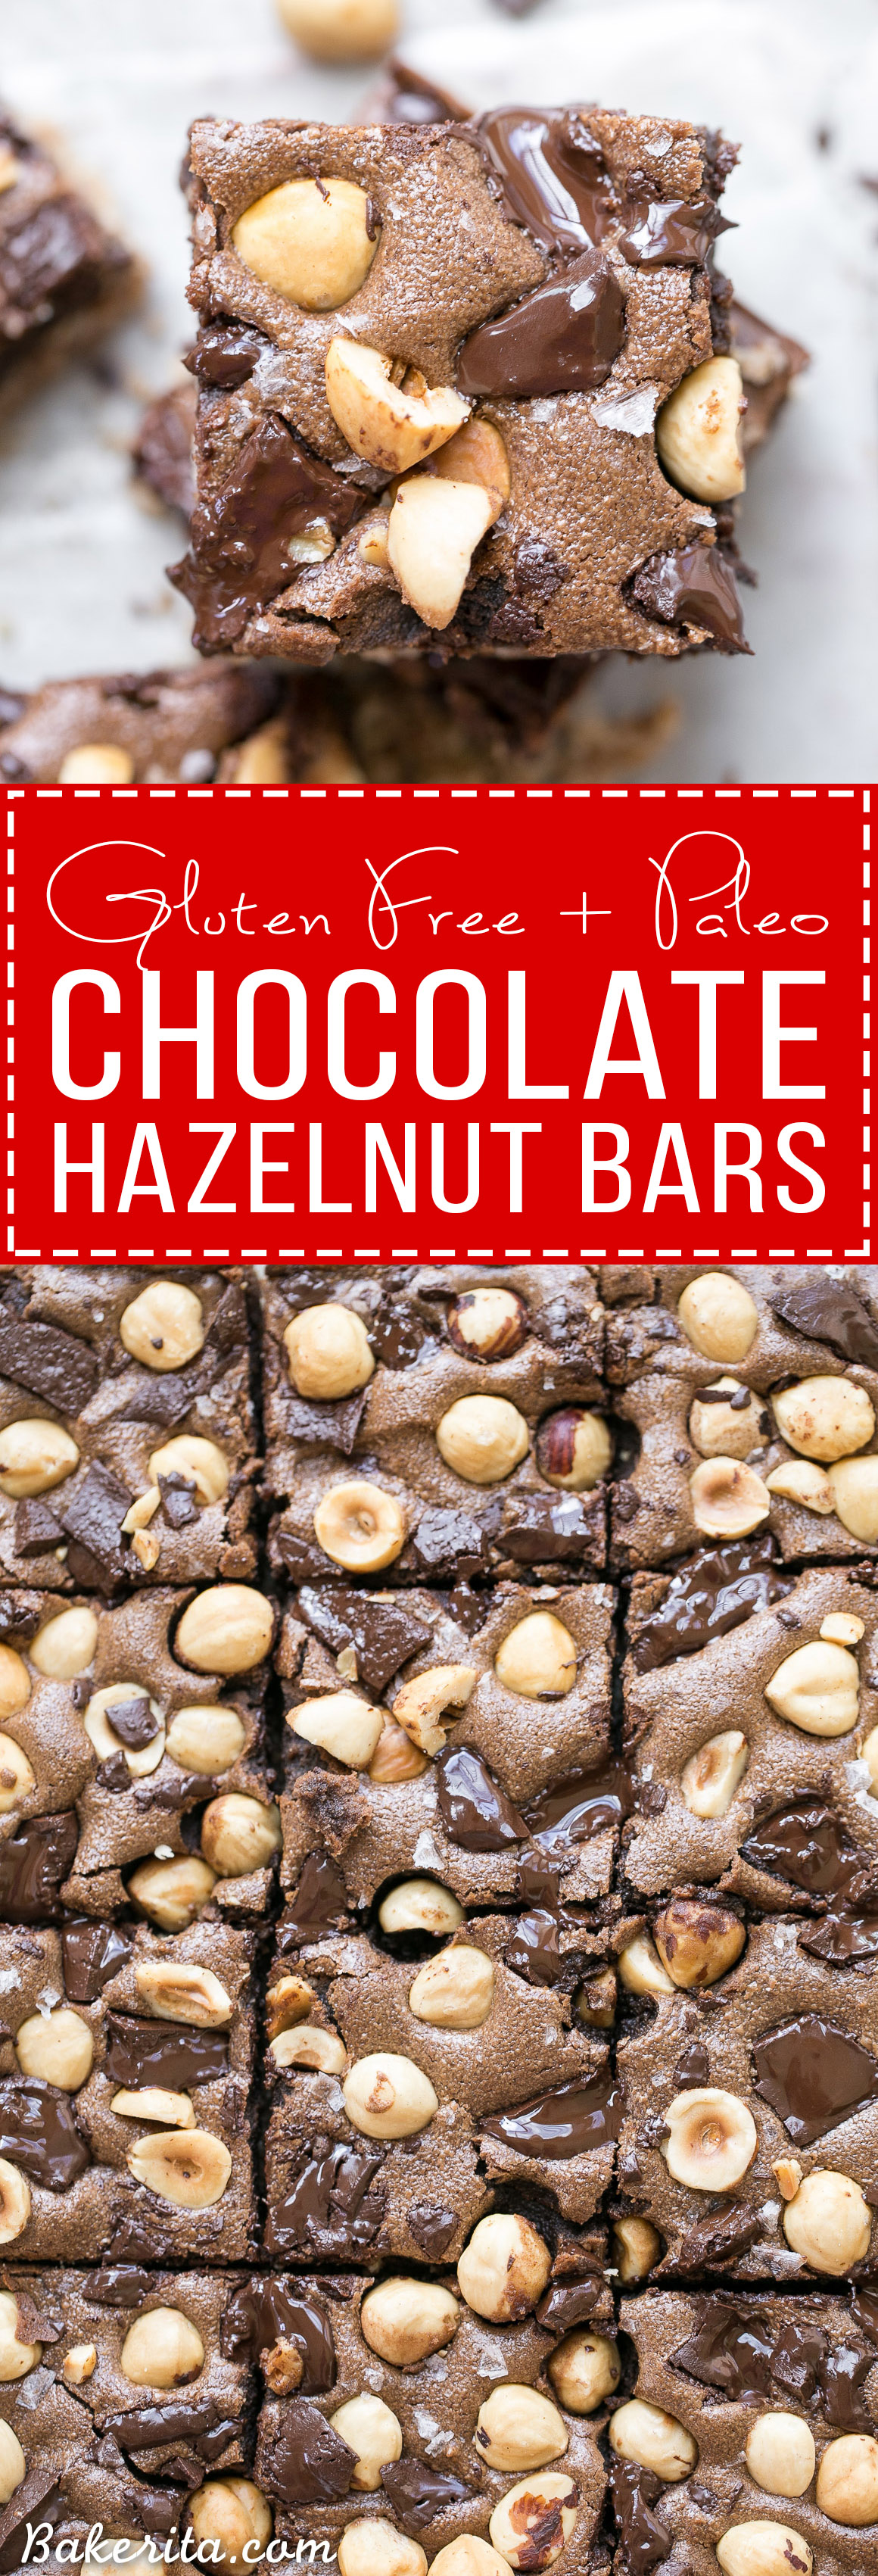 These Chocolate Hazelnut Bars have a hazelnut flour crust and are topped with dark chocolate chunks + crunchy hazelnuts. These gluten-free, Paleo + refined sugar free bars get even fudgier the day after they're made!